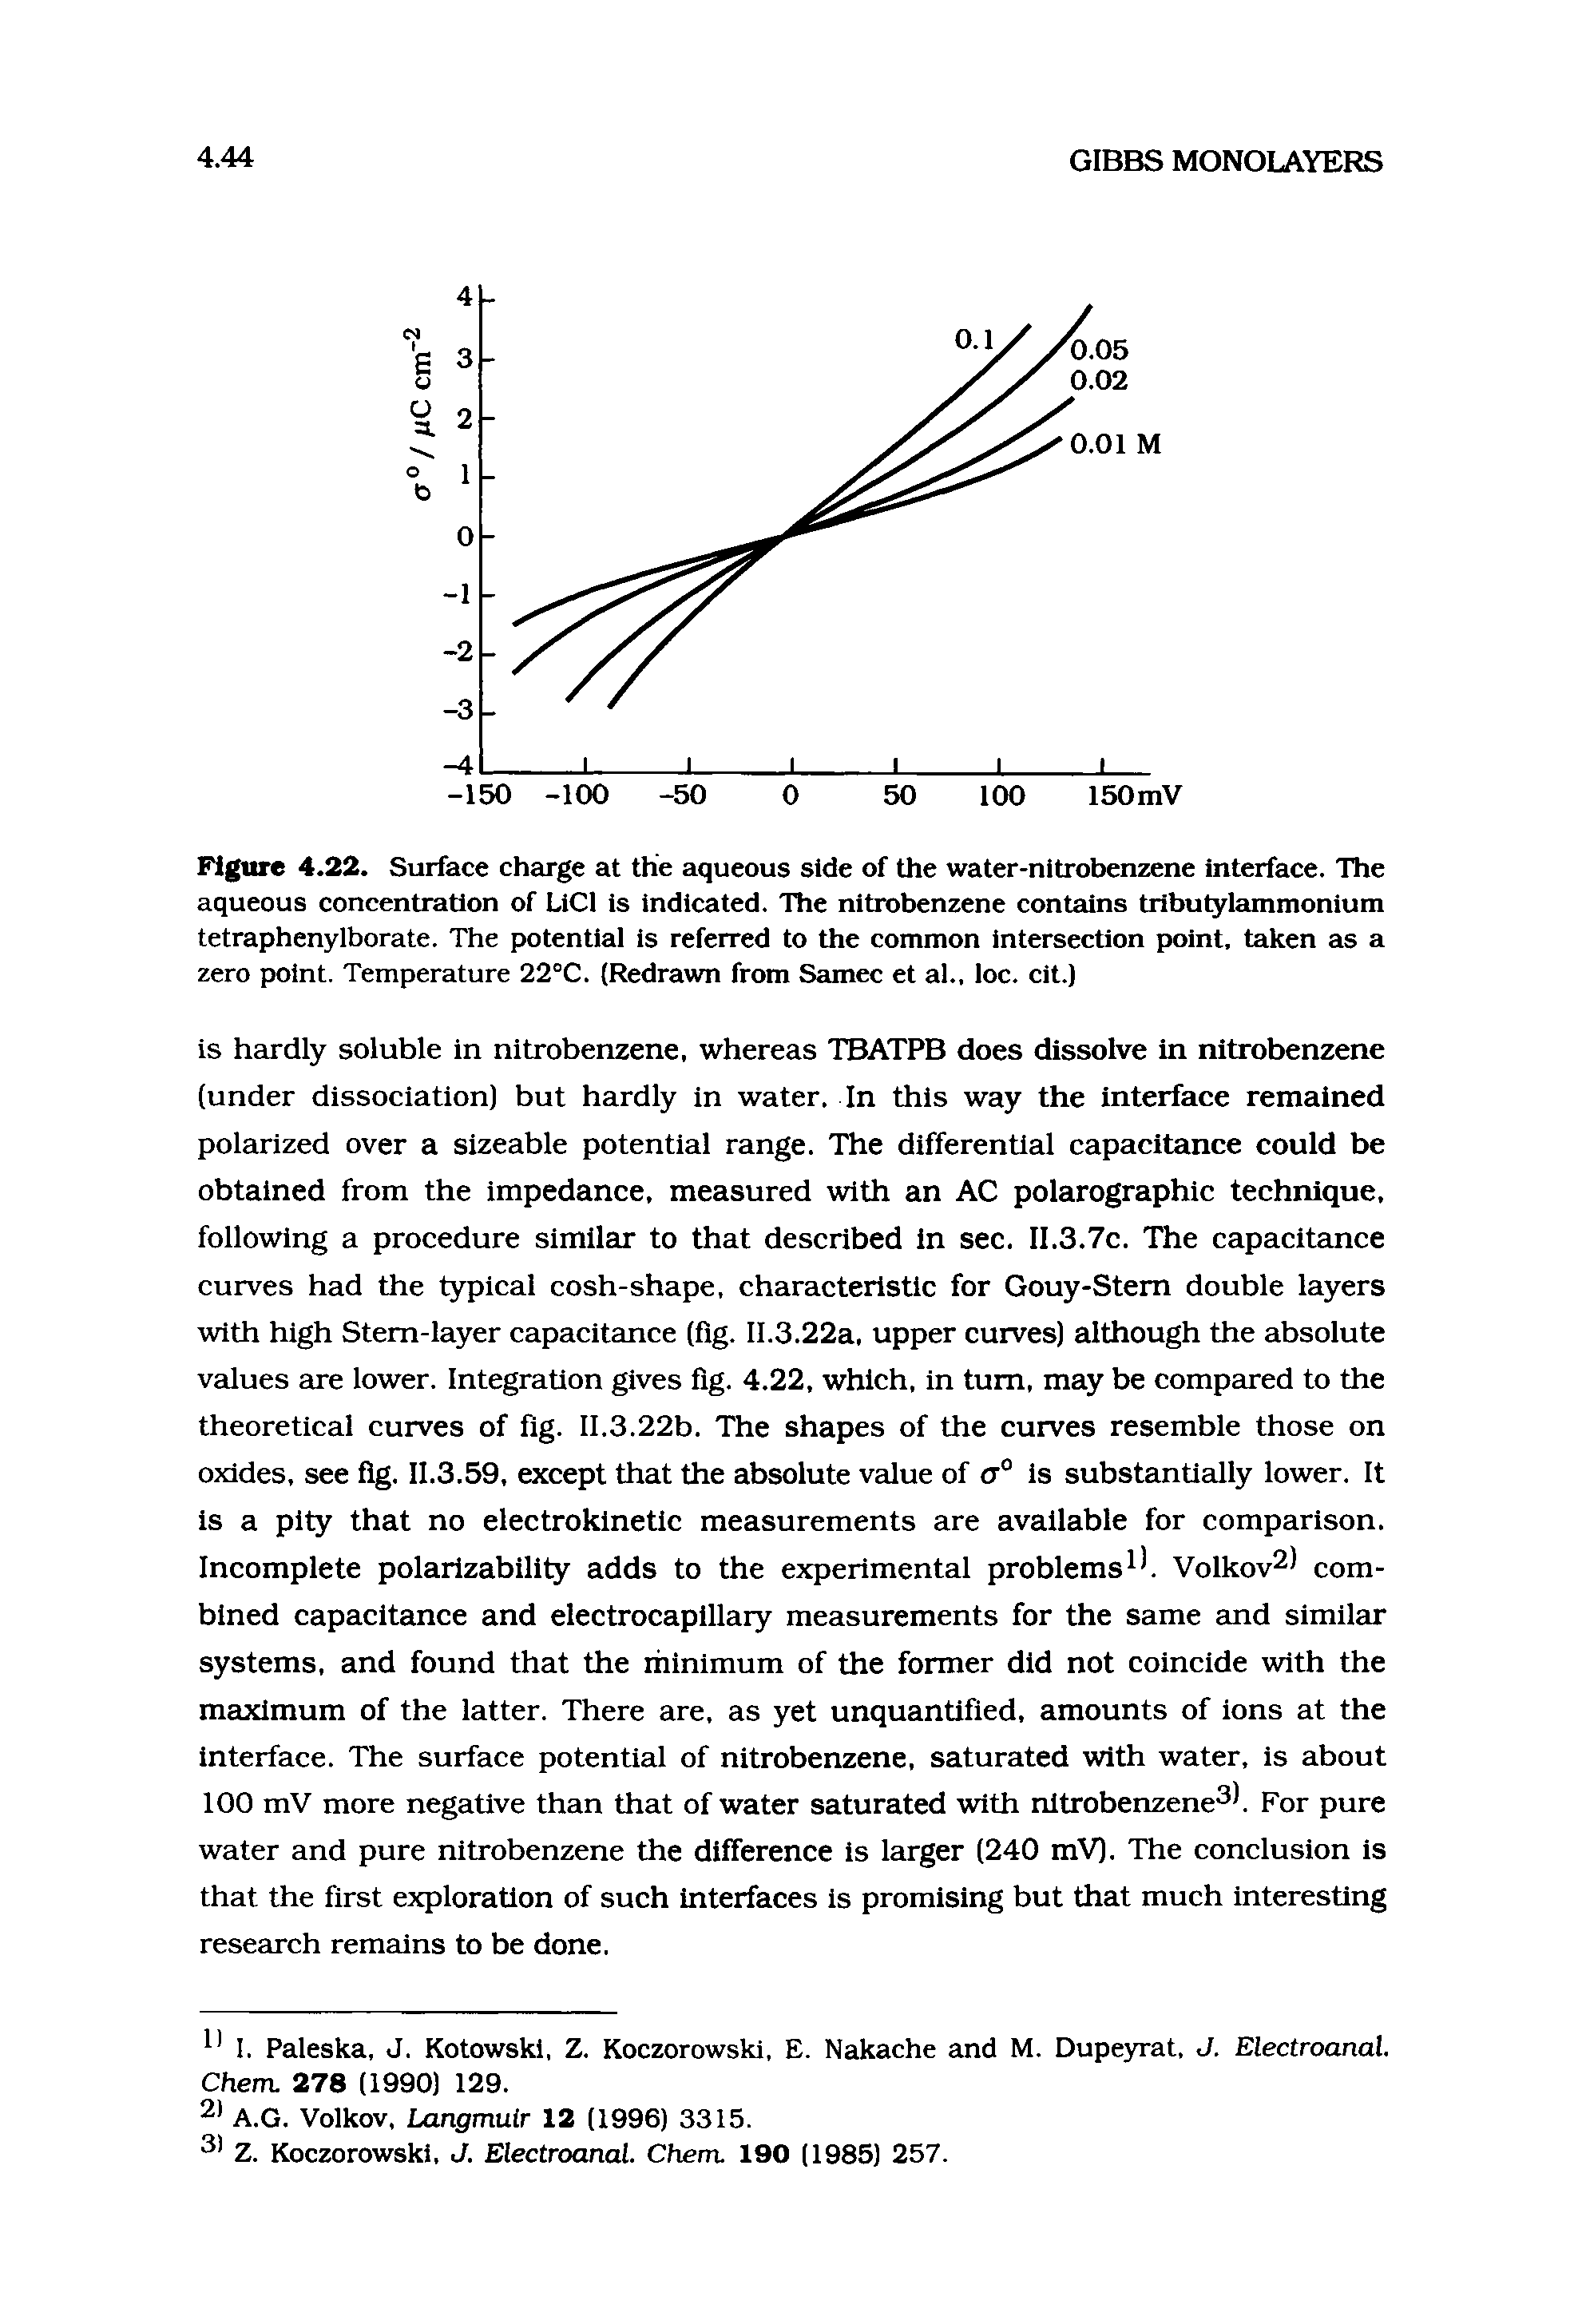 Figure 4.22. Surface charge at the aqueous side of the water-nitrobenzene interface. The aqueous concentration of LiCl is indicated. The nitrobenzene contains tribuiylainmonium tetraphenylborate. The potential is referred to the common intersection point, taken as a zero point. Temperature 22°C. (Redrawn from Samec et al., loc. cit.)...